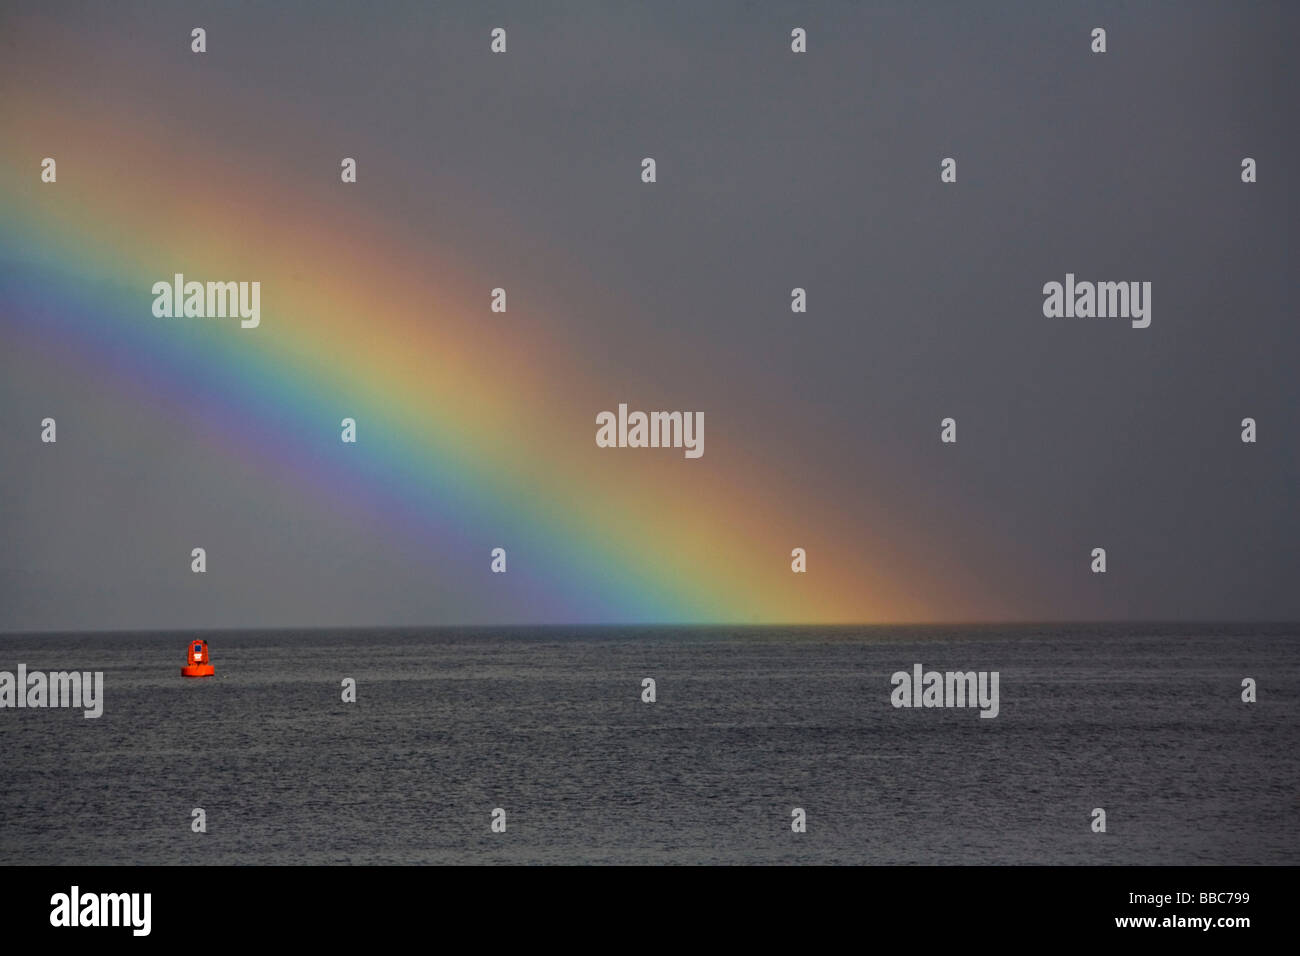 End Of The Rainbow High Resolution Stock Photography and Images - Alamy